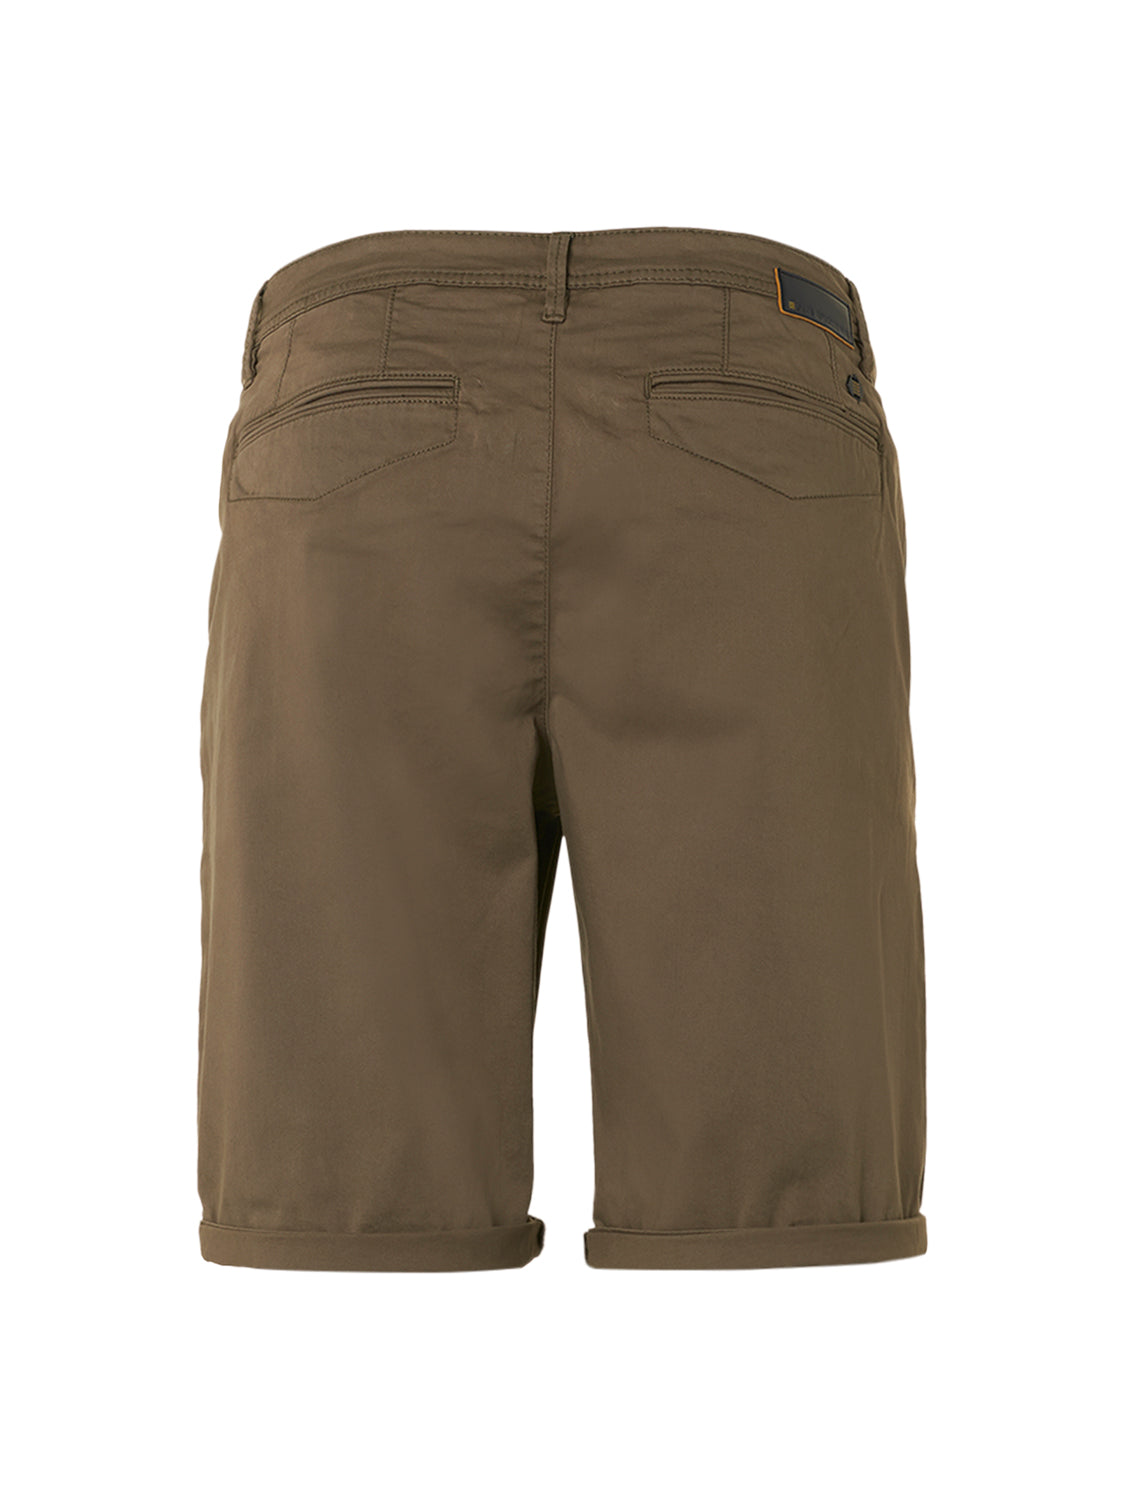 NO EXCESS STRETCH TWILL CHINO SHORT 198190366SN